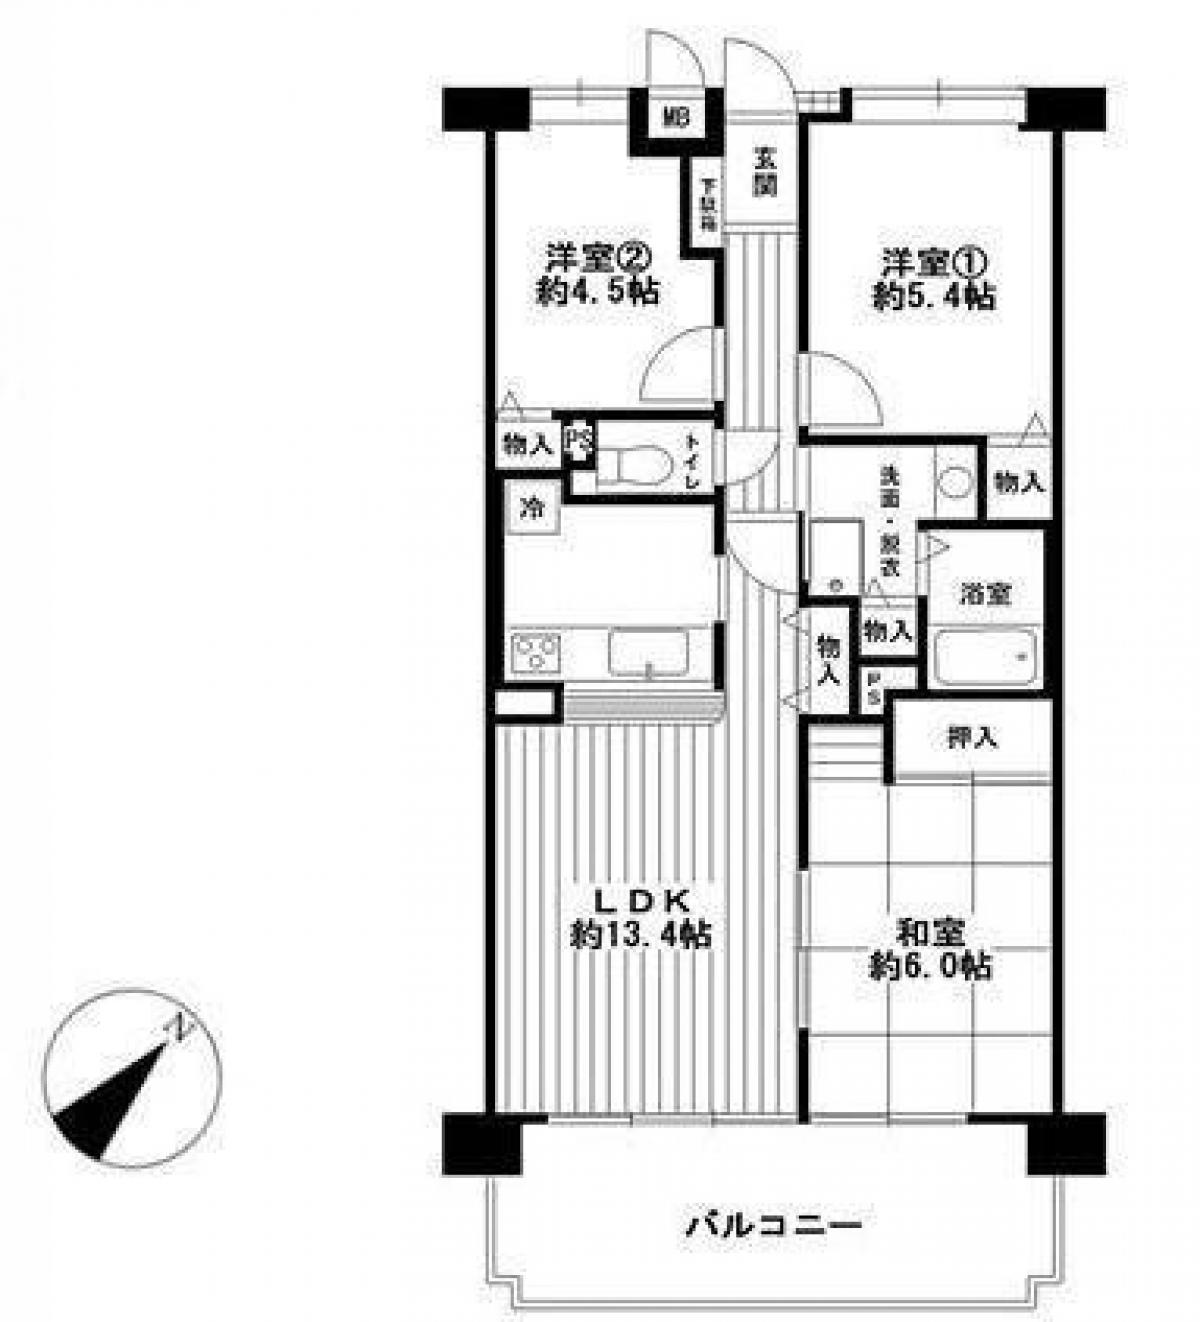 Picture of Apartment For Sale in Kaizuka Shi, Osaka, Japan